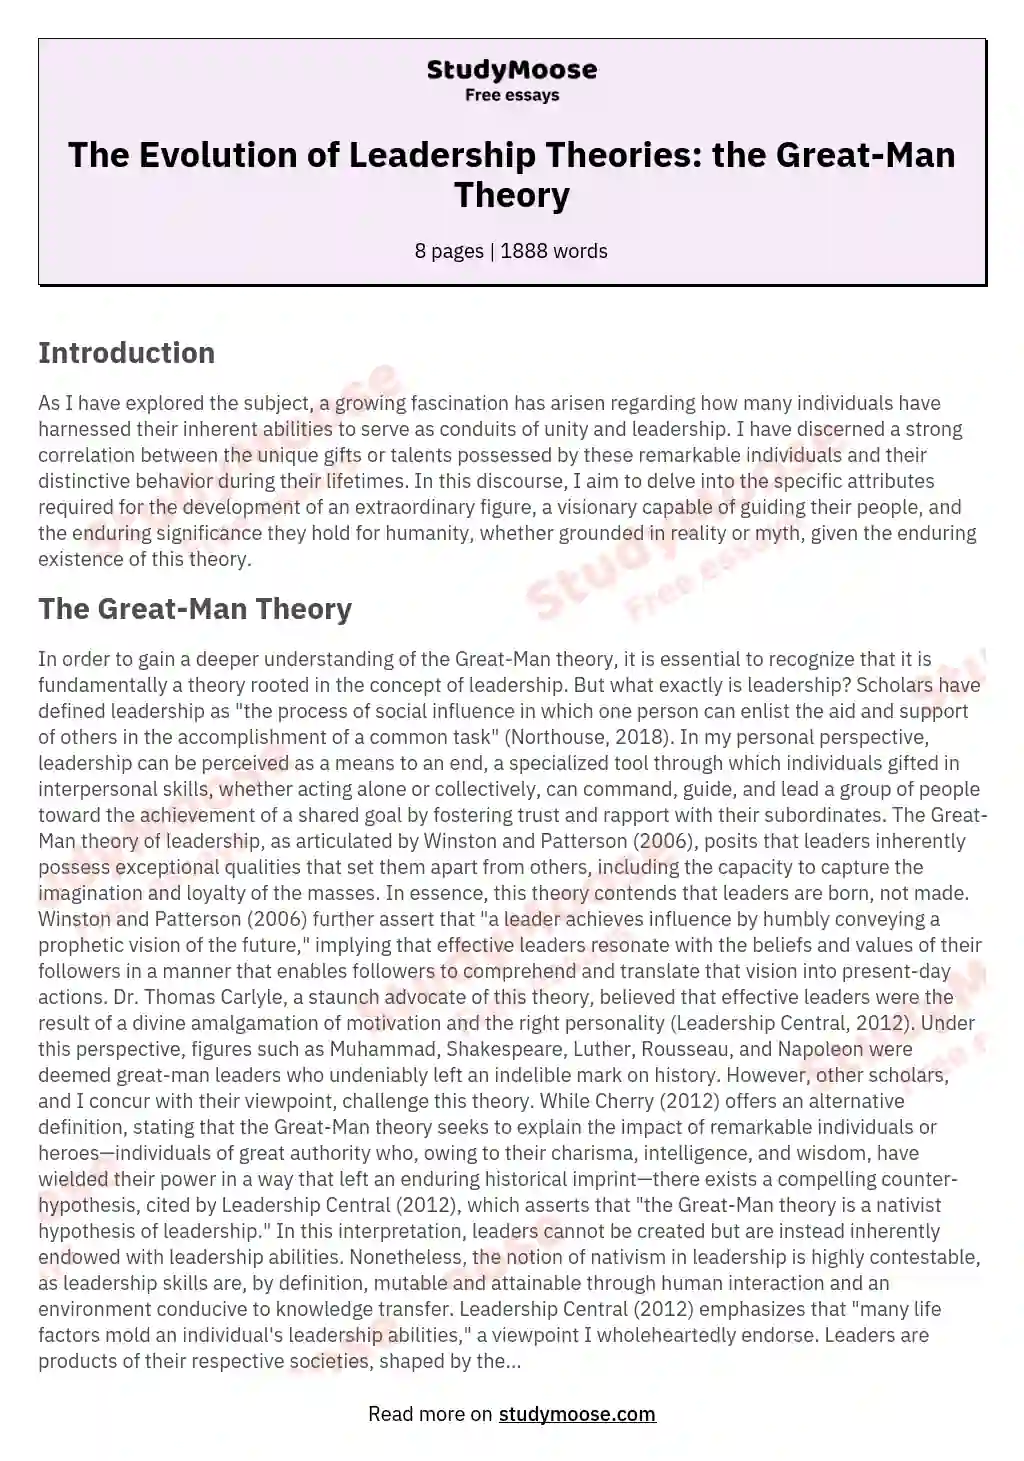 The Evolution of Leadership Theories: the Great-Man Theory essay